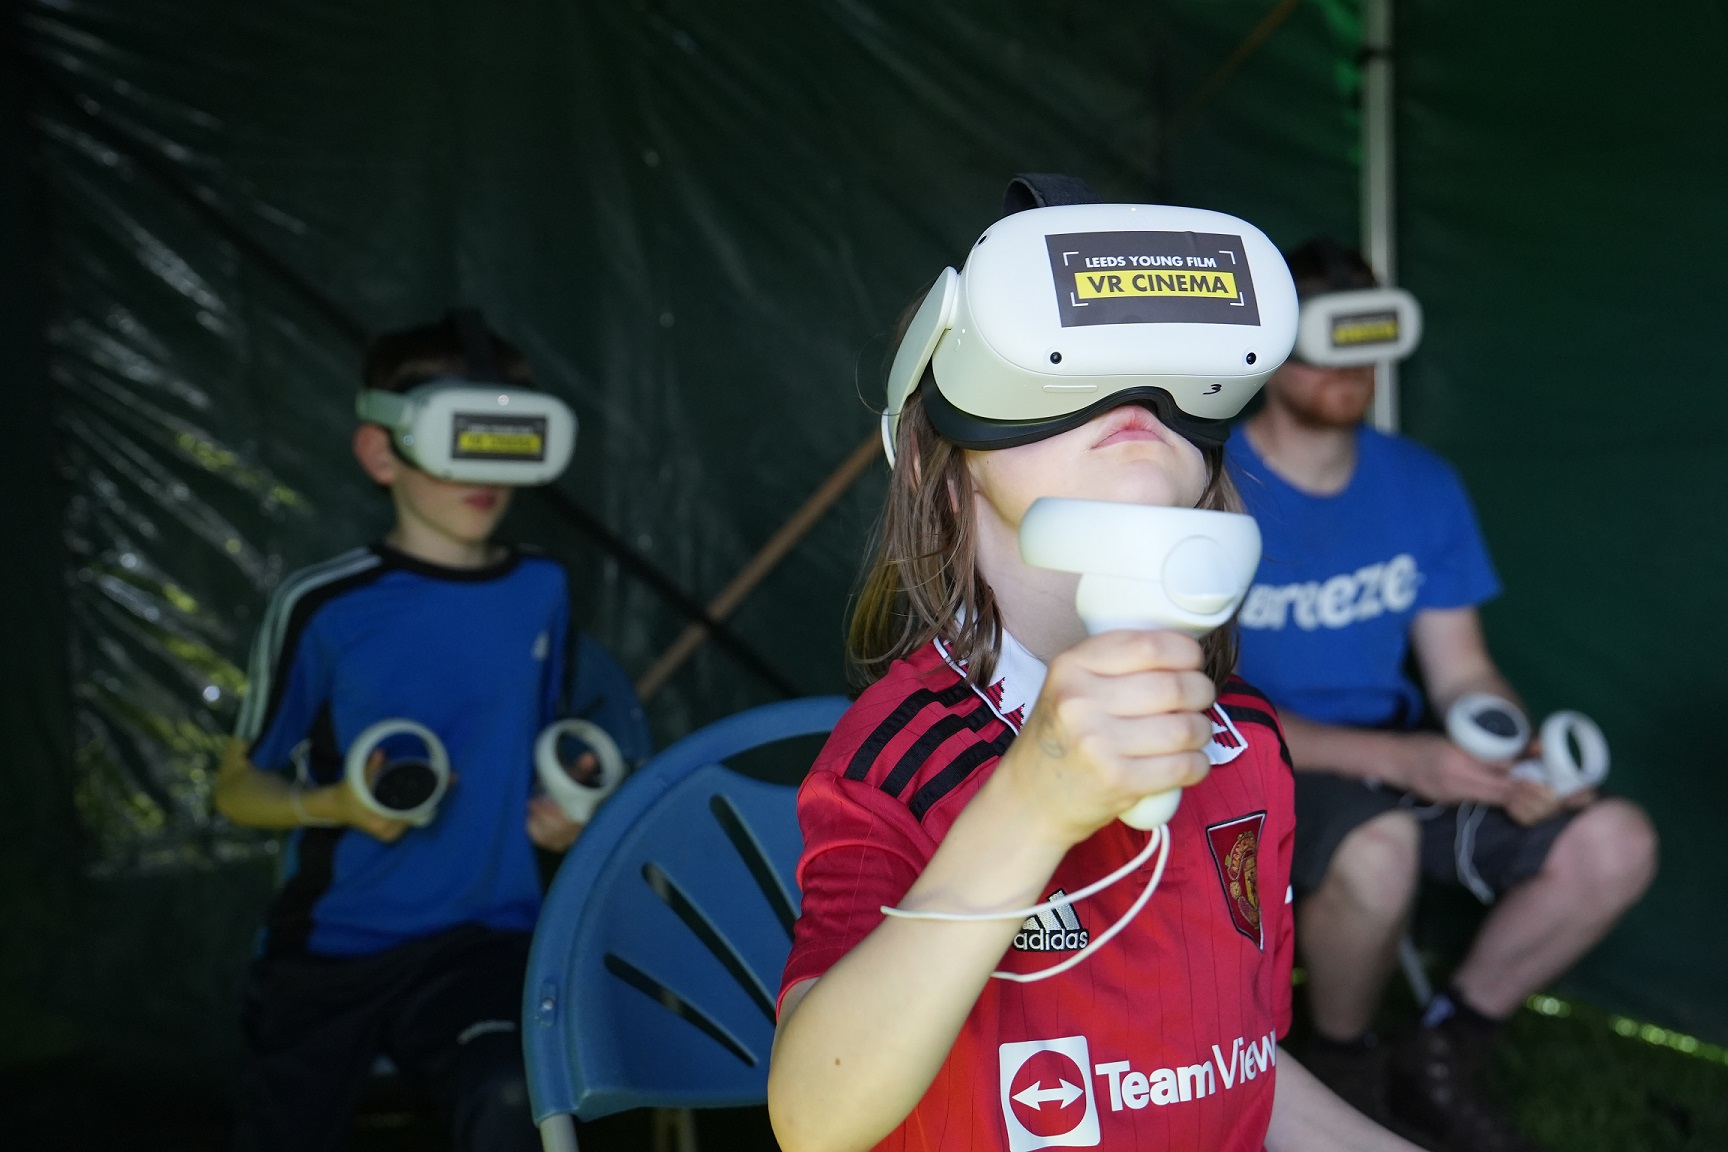 A young boy sits in a darkened marquee with a VR Headset on that reads: LEEDS YOUNG FILM VR CINEMA